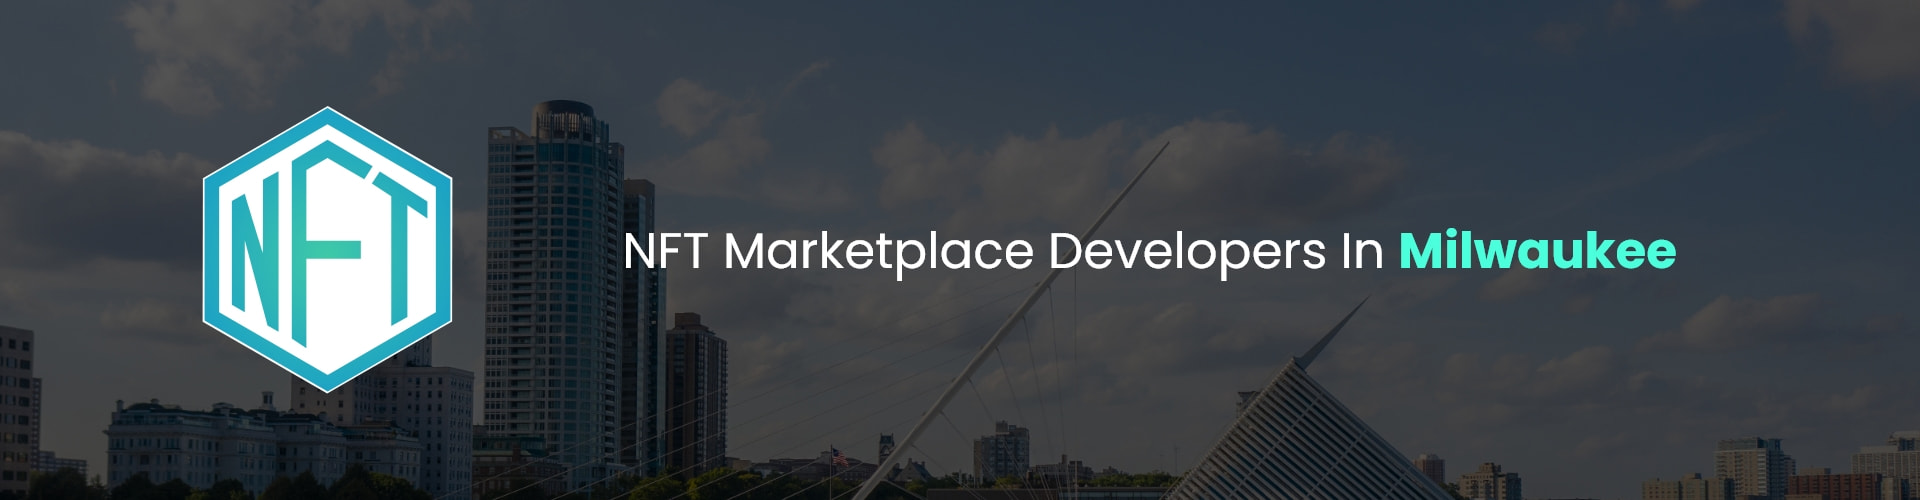 hire nft marketplace developers in milwaukee